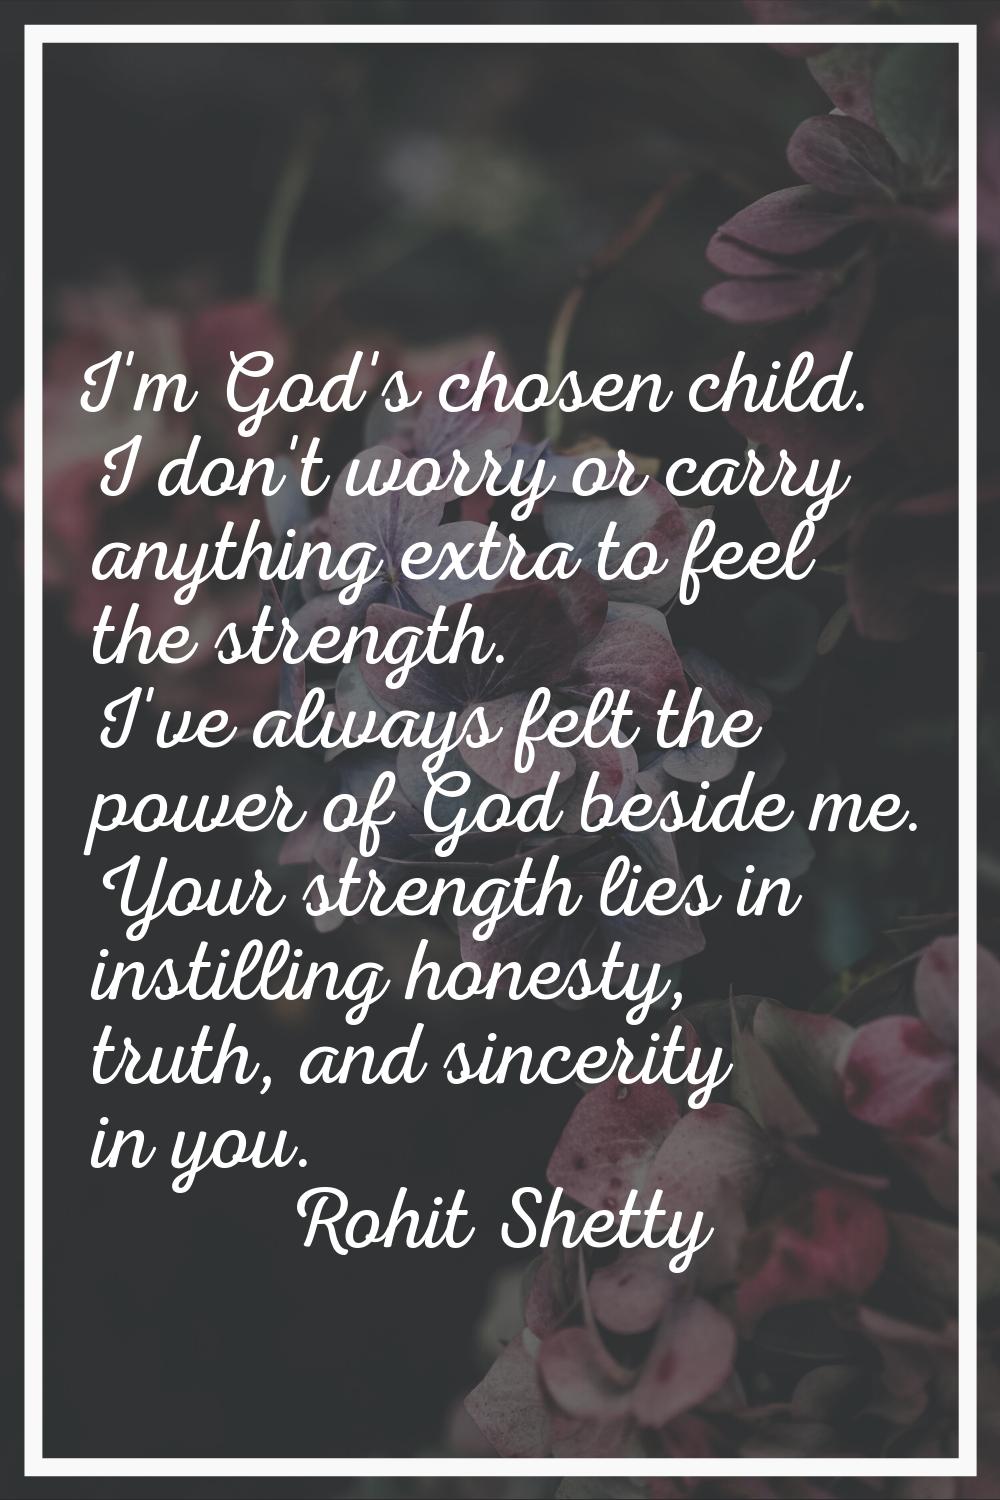 I'm God's chosen child. I don't worry or carry anything extra to feel the strength. I've always fel